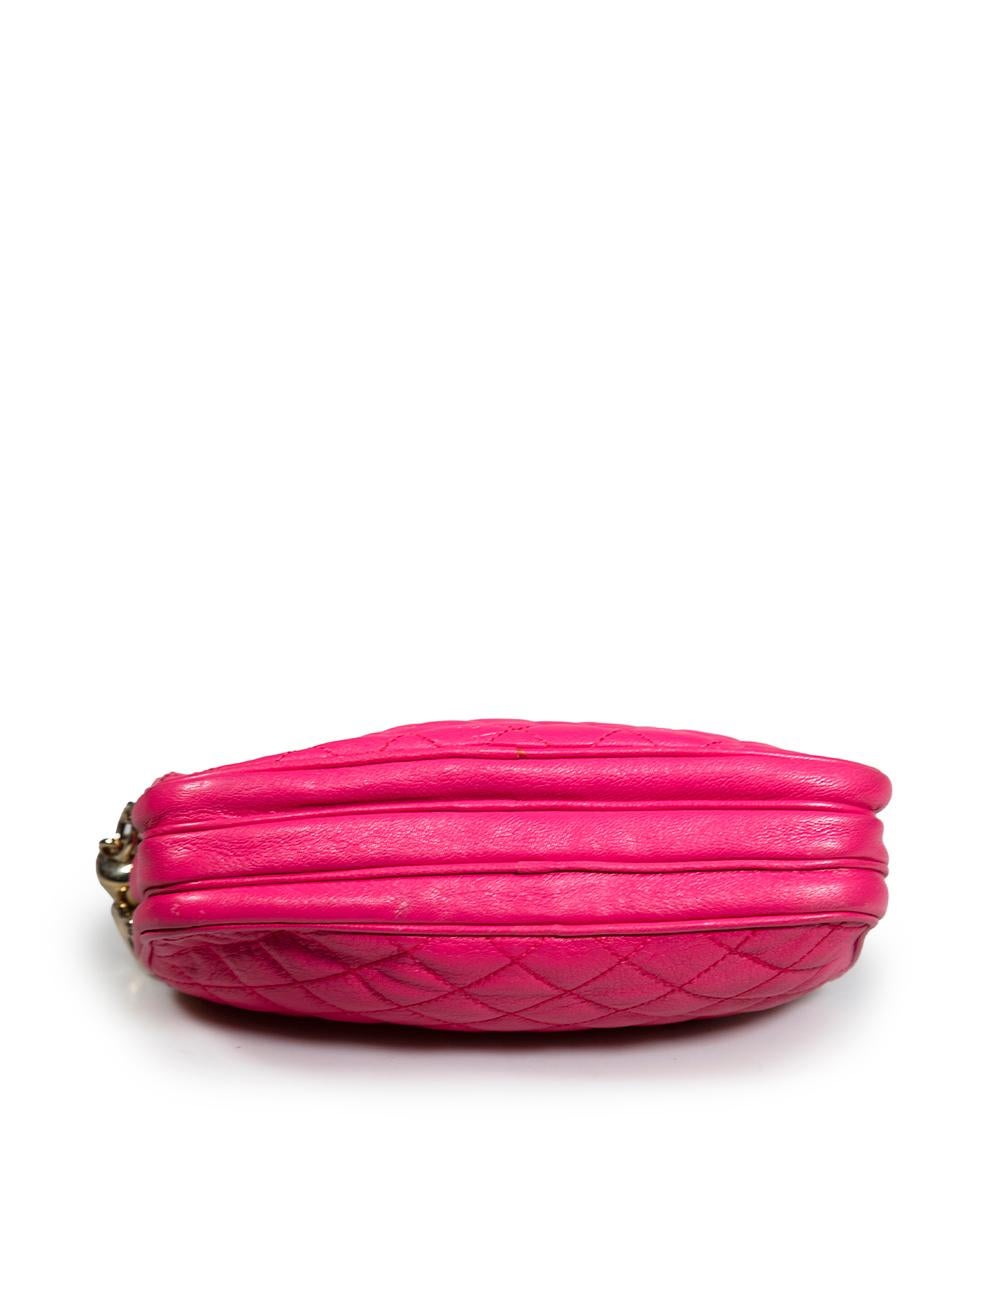 Women's Dolce & Gabbana Pink Quilted Lily Glam Clutch For Sale